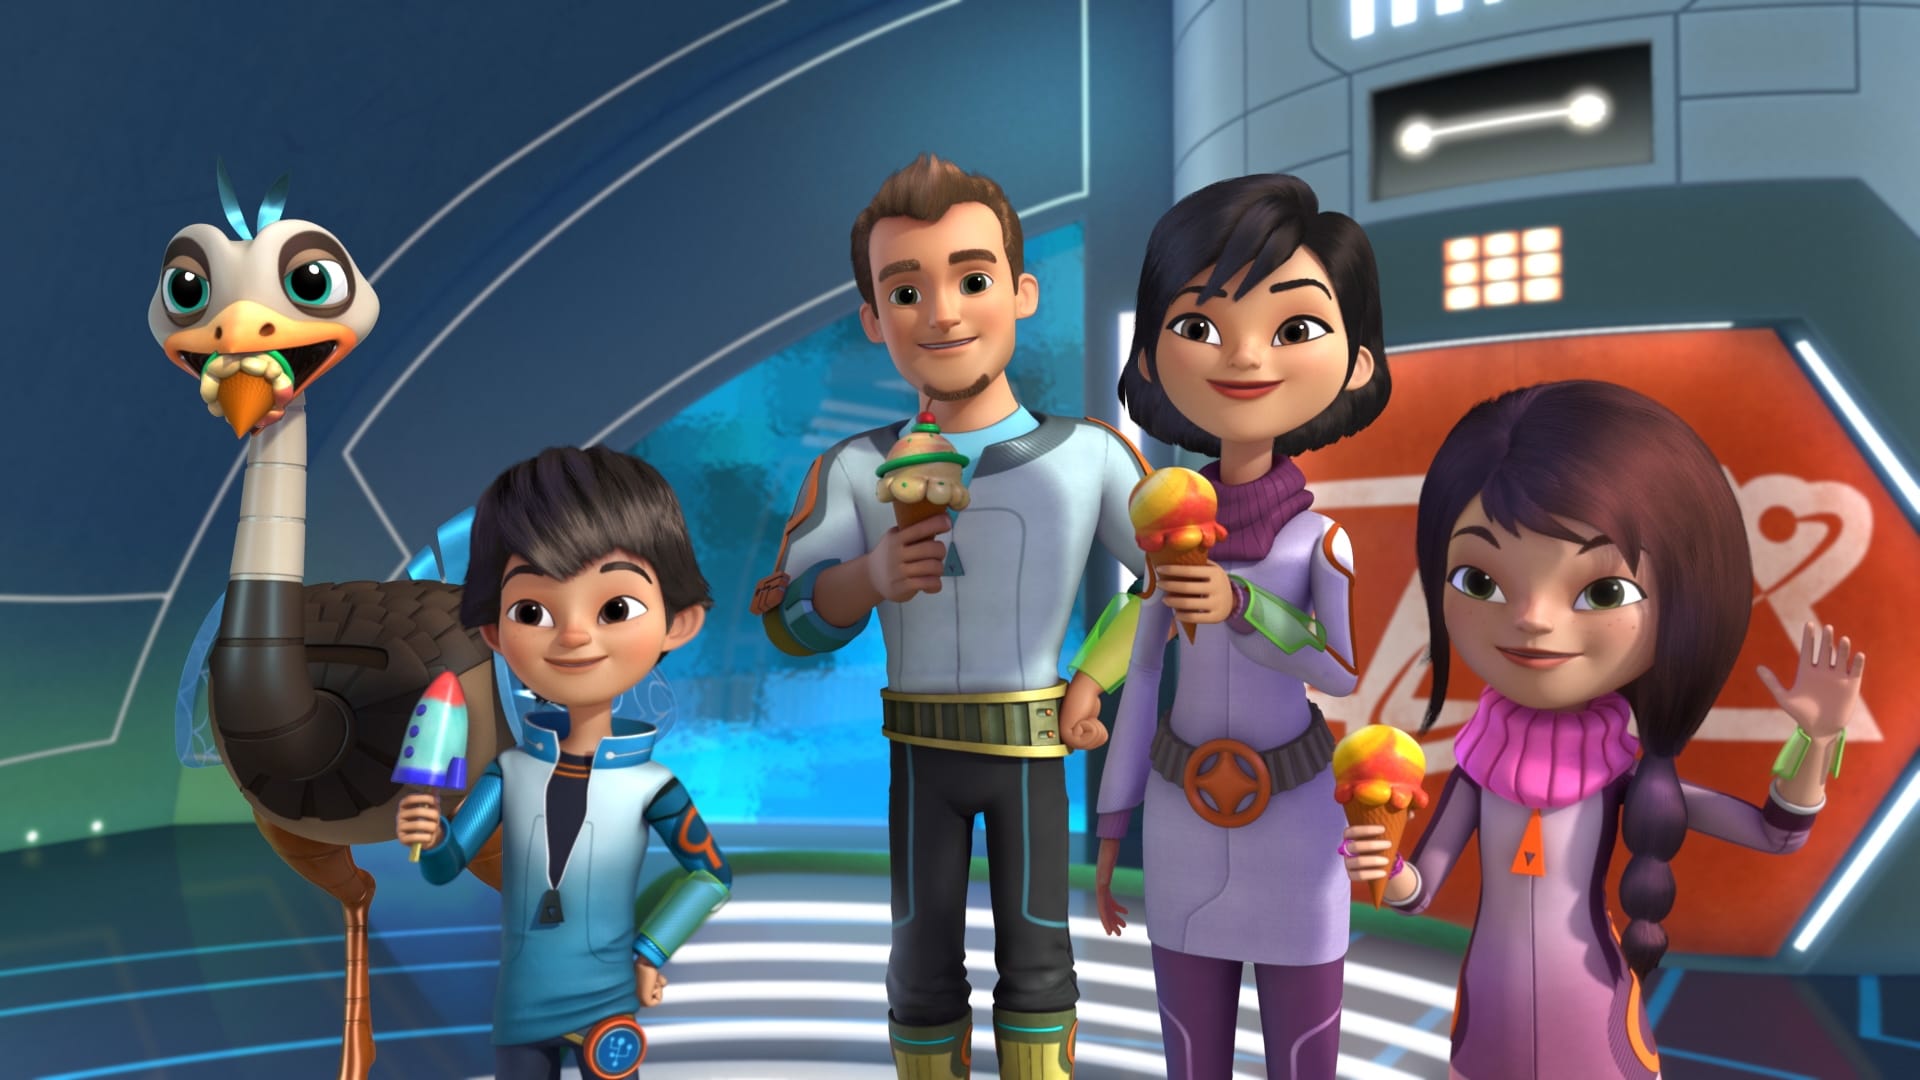 Watch Miles from Tomorrowland Online